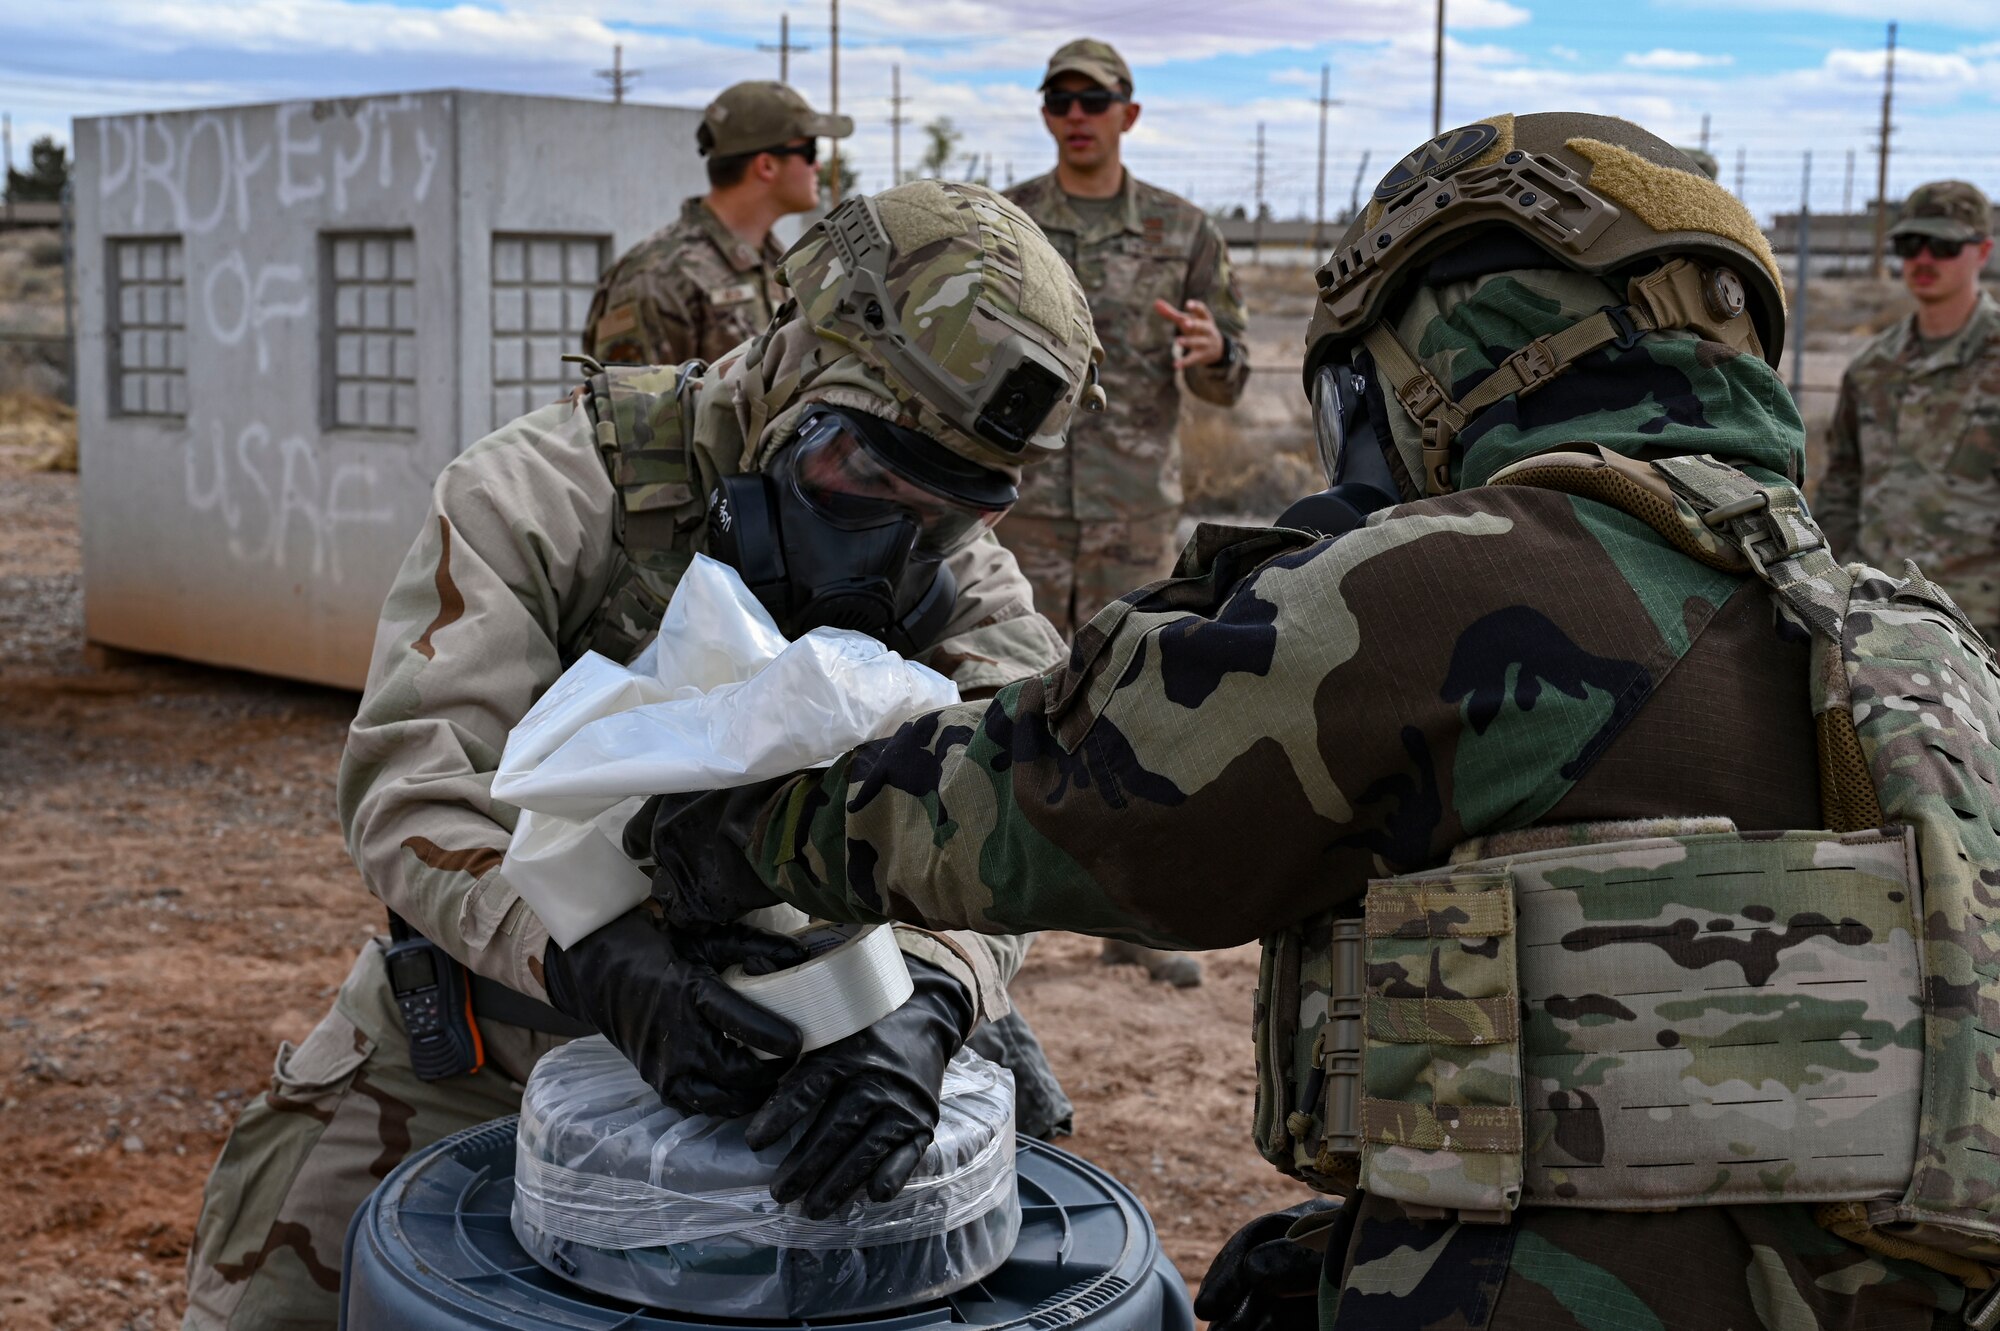 U.S. Air Force Airman 1st Class Spencer Pettingill, left, and U.S. Air Force Senior Airman Danielle Alpi, 49th Civil Engineer Squadron explosive ordnance disposal apprentices, wrap up an M23 chemical landmine during a chemical munition decontamination exercise at Holloman Air Force Base, New Mexico, March 23, 2023. The 49th CES EOD flight works meticulously to provide maximum safety when it comes to dealing with chemical contaminations, ensuring that any volatile materials are properly contained. (U.S Air Force photo by Airman 1st Class Isaiah Pedrazzini)